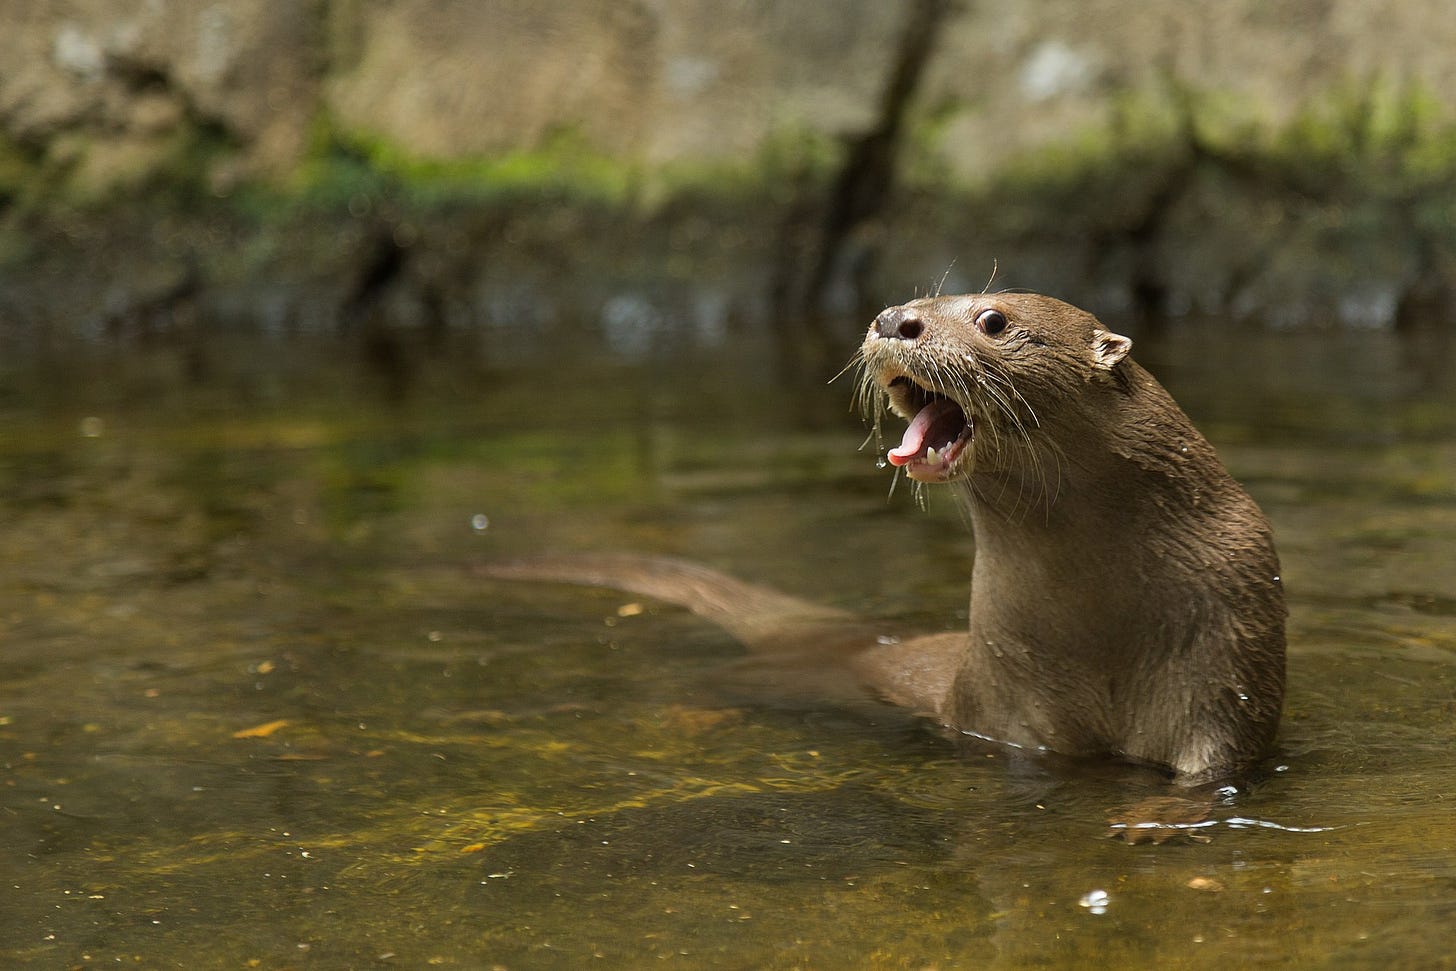 A neotropical river otter (Lontra longicaudis) standing in shallow water, its mouth open and tongue sticking out.